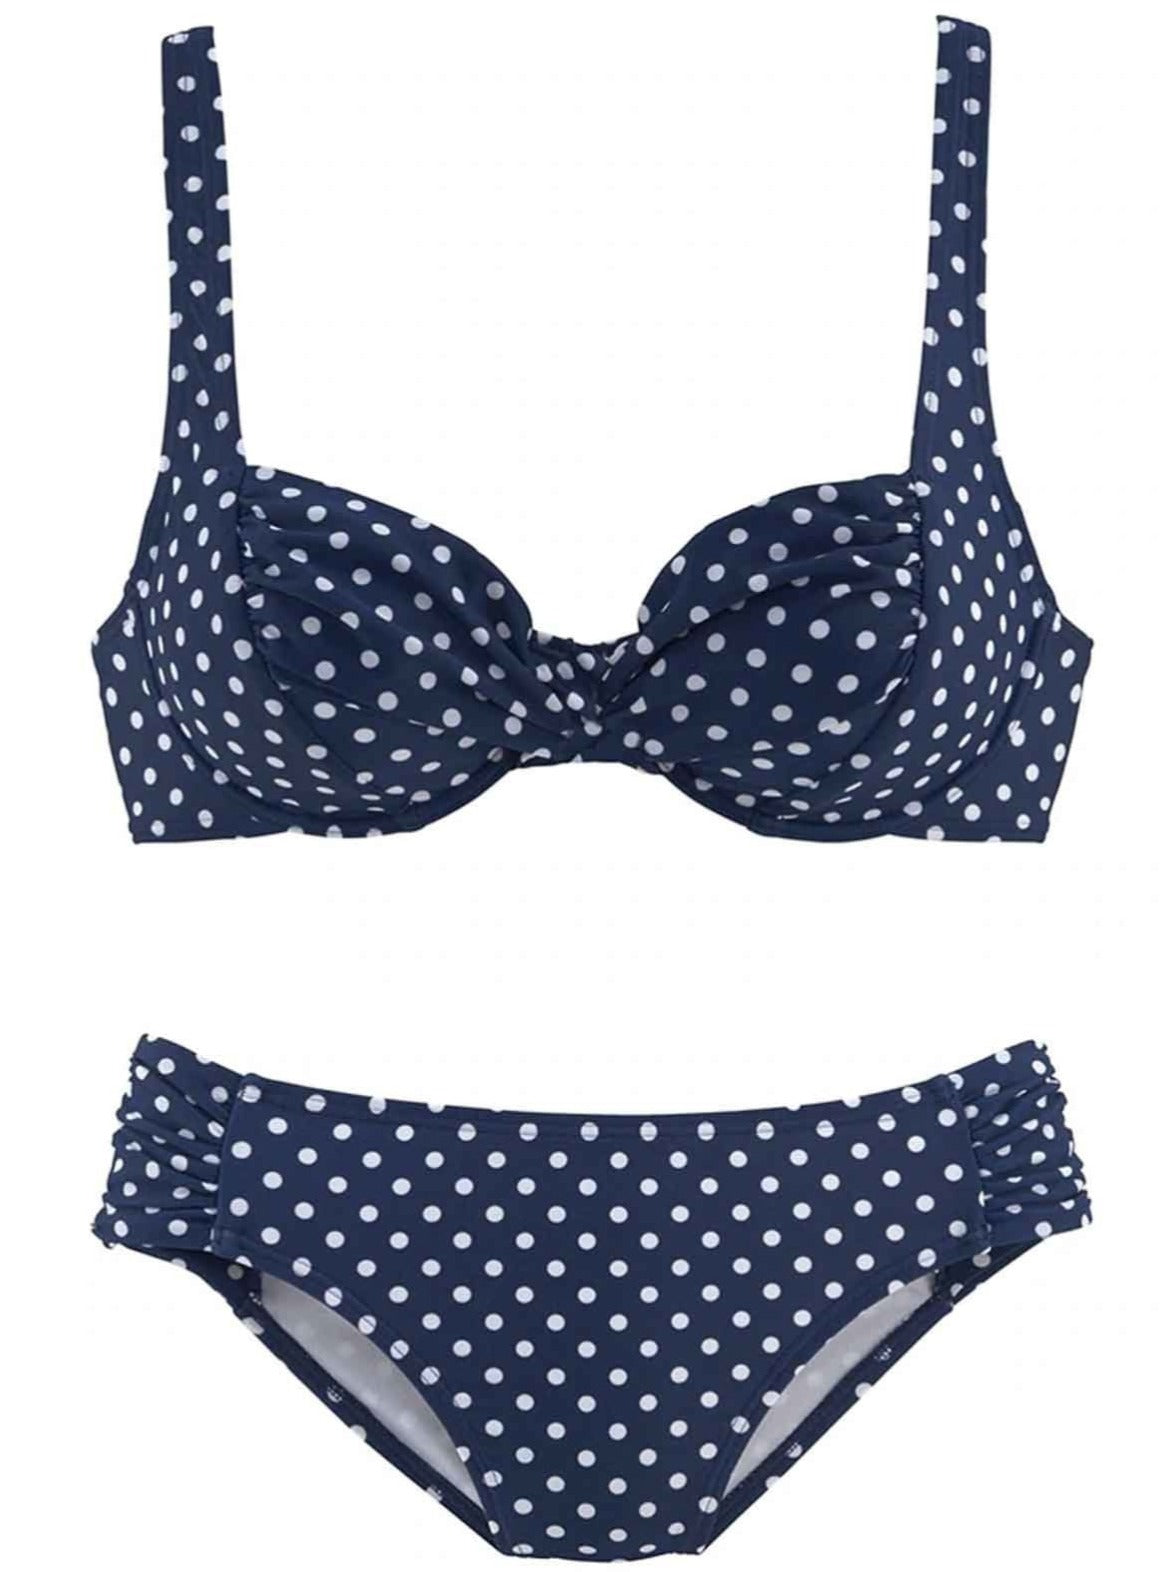 Womens Push Up Plus Size Vintage Two Piece Swimsuit - Navy Polka Dot / M - Womens Swimsuit